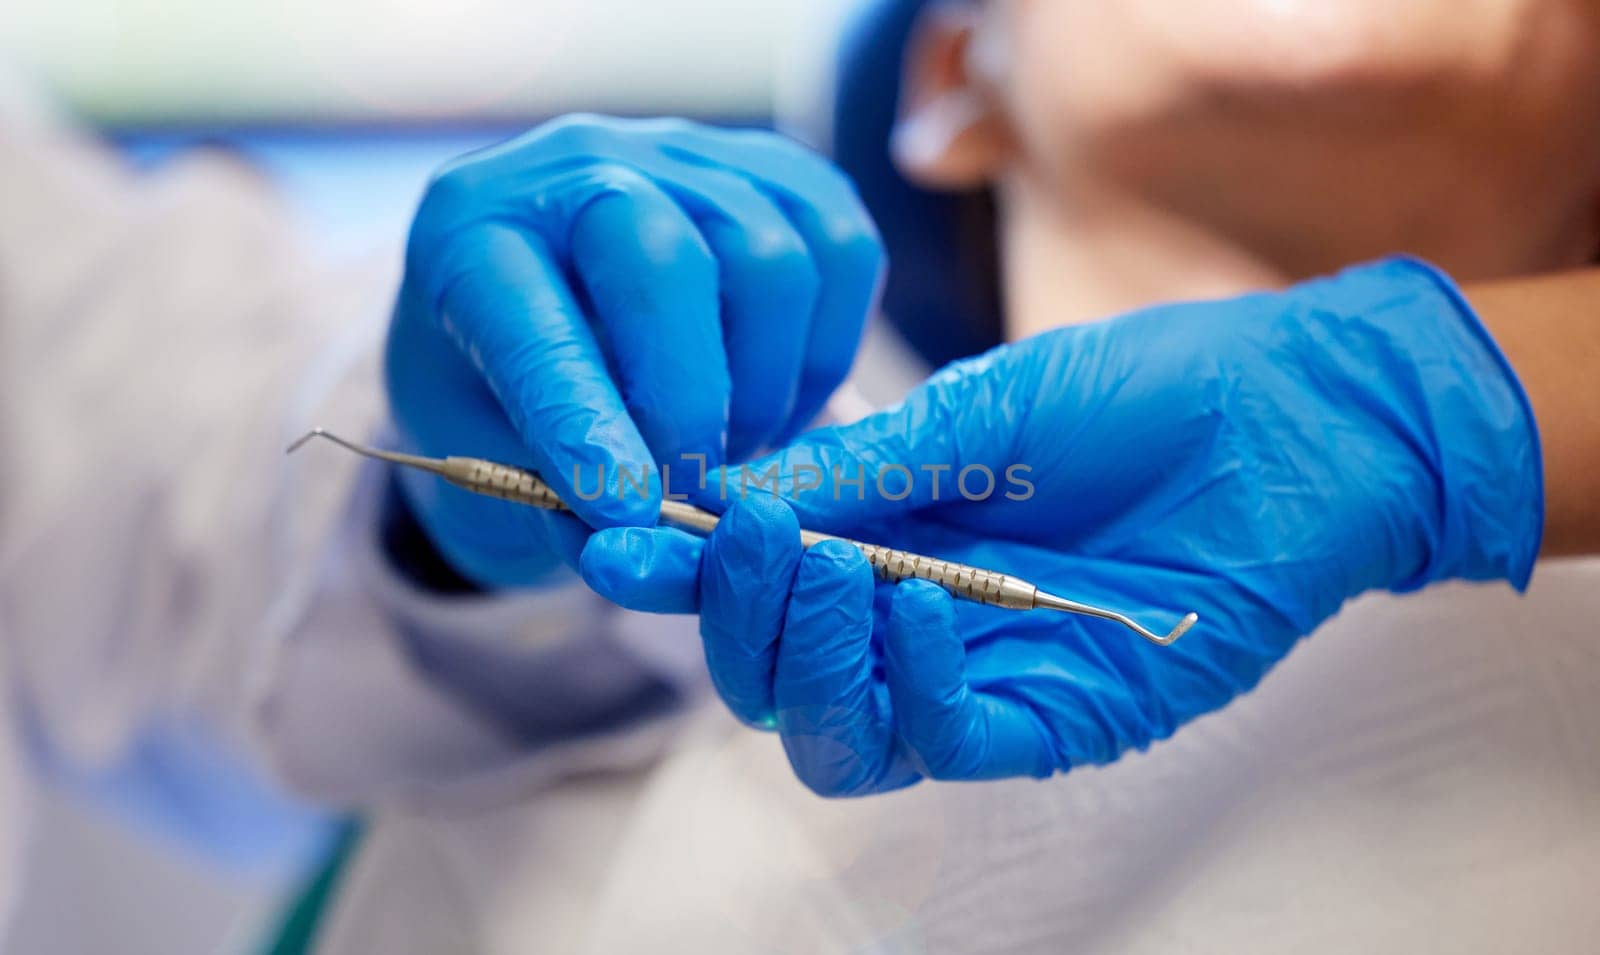 Teamwork makes the teeth cleaning work. a young woman having a dental procedure performed on her